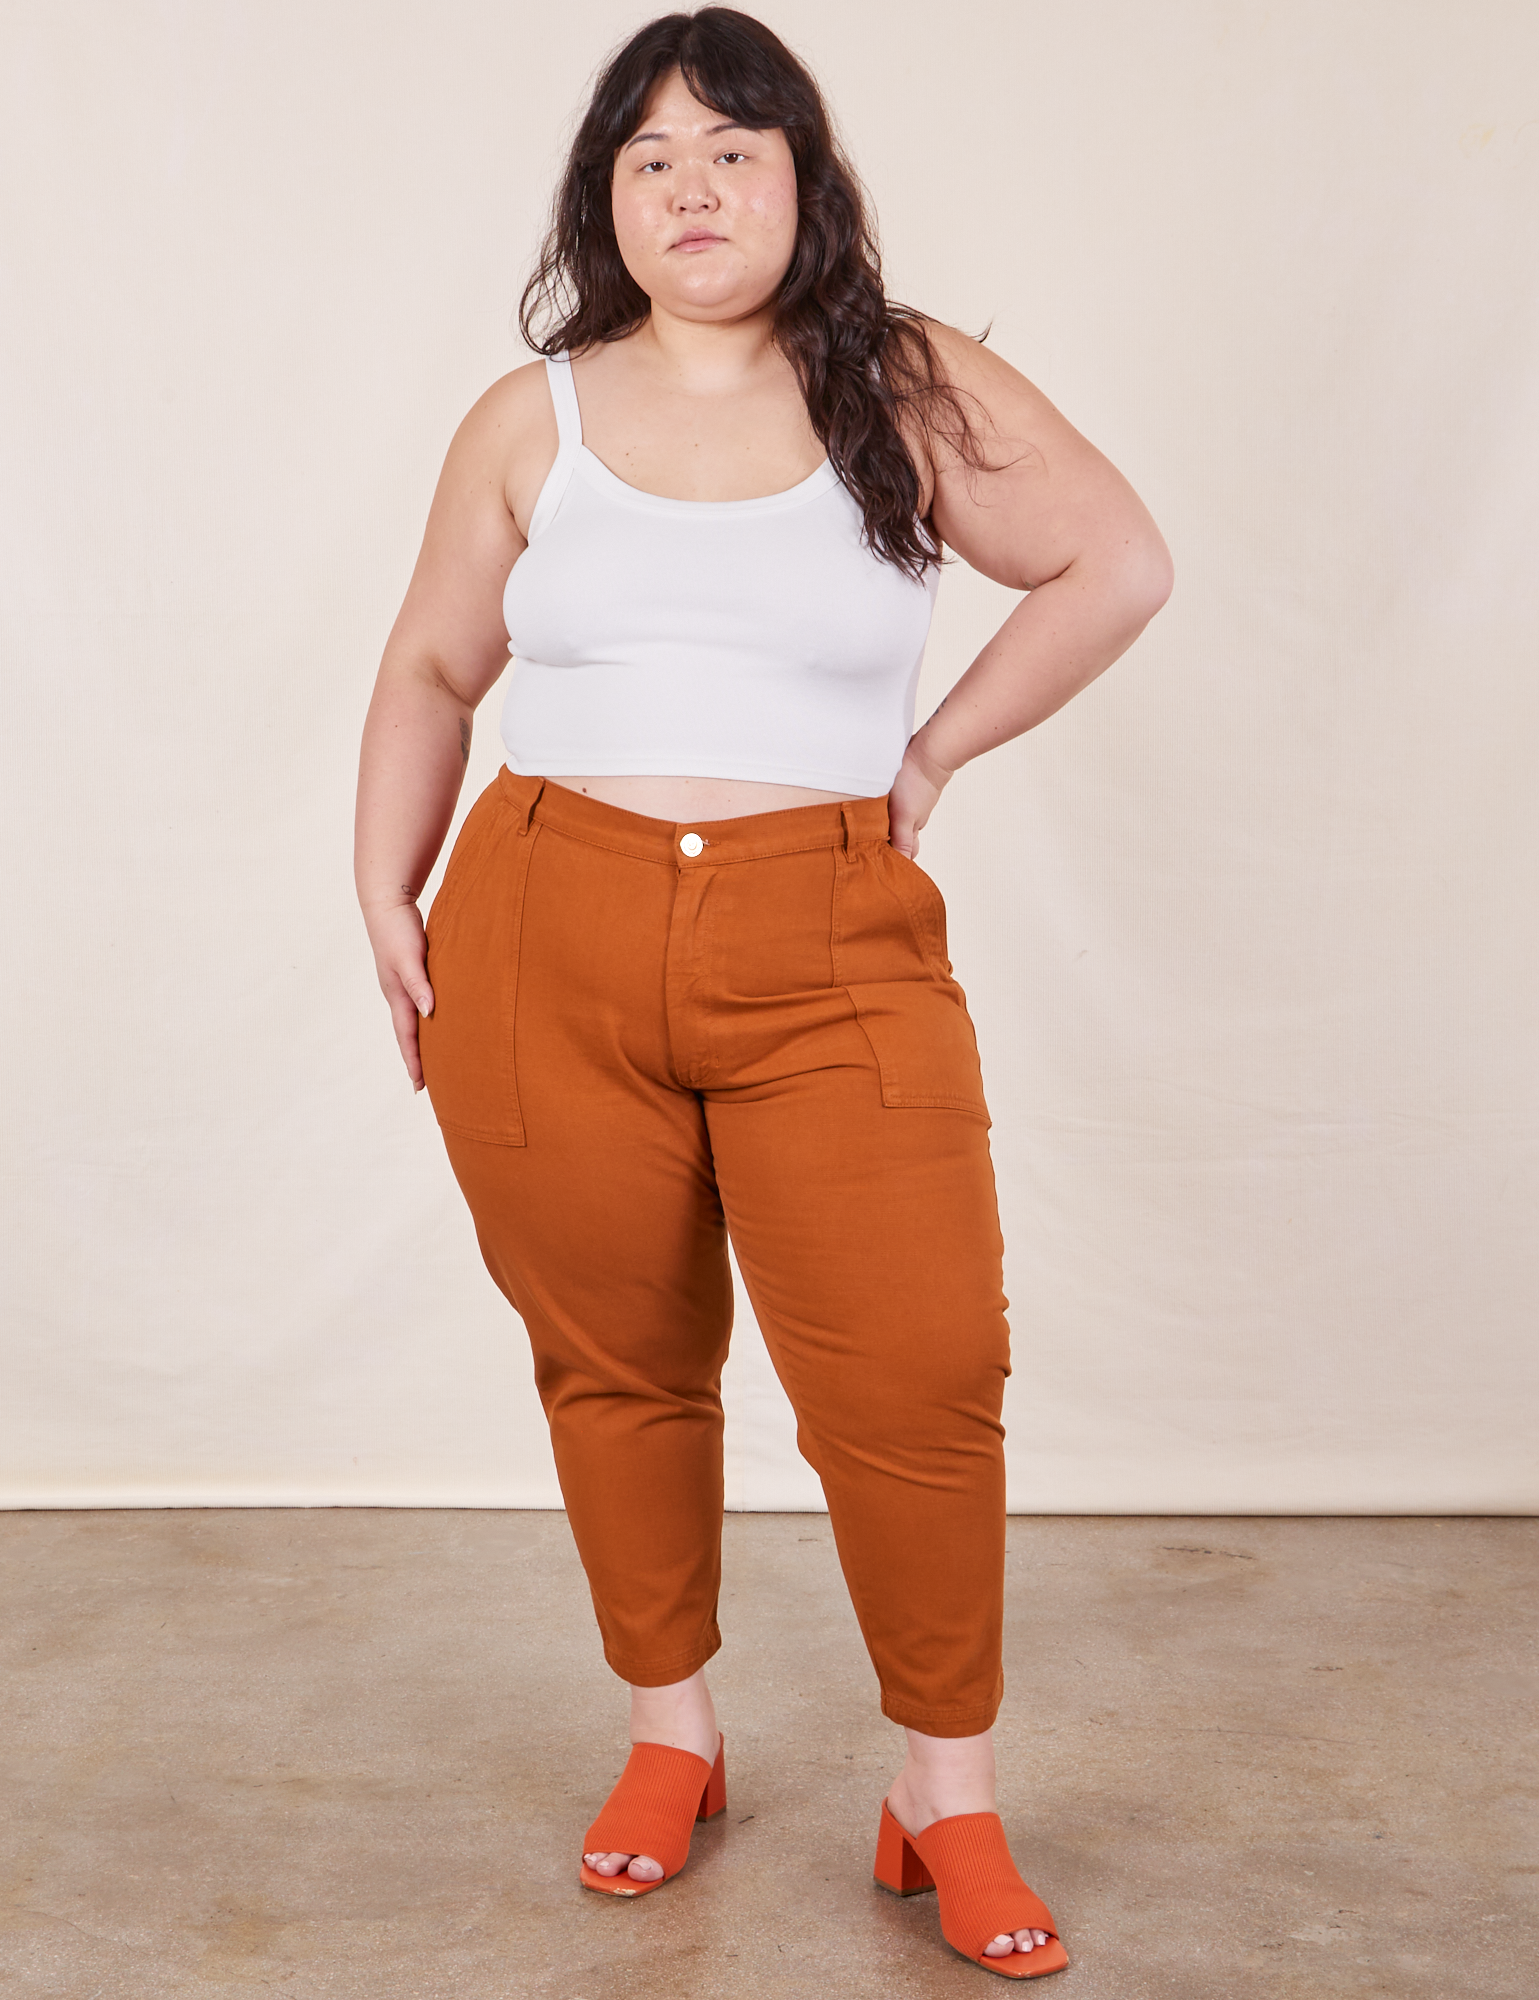 Ashley is 5&#39;7&quot; and wearing 1XL Petite Pencil Pants in Burnt Terracotta paired with Cropped Cami in vintage tee off-white